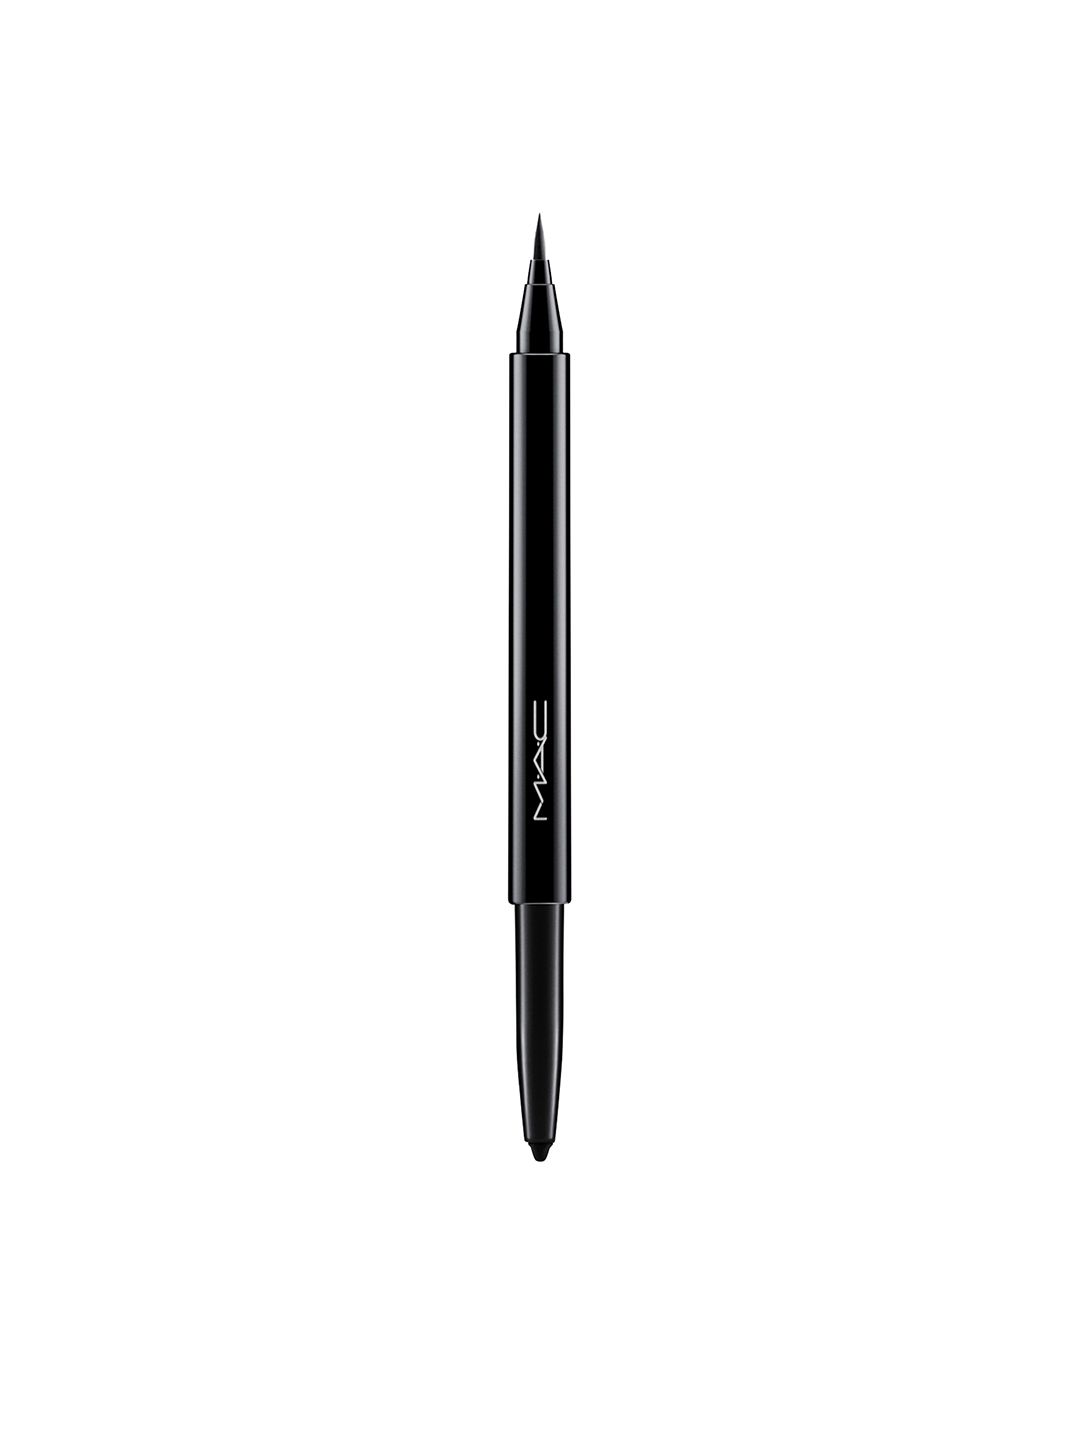 M.A.C Dare Black All Day Waterproof Eyeliner with Hydrogenerated Castor Oil 0.9 g Price in India